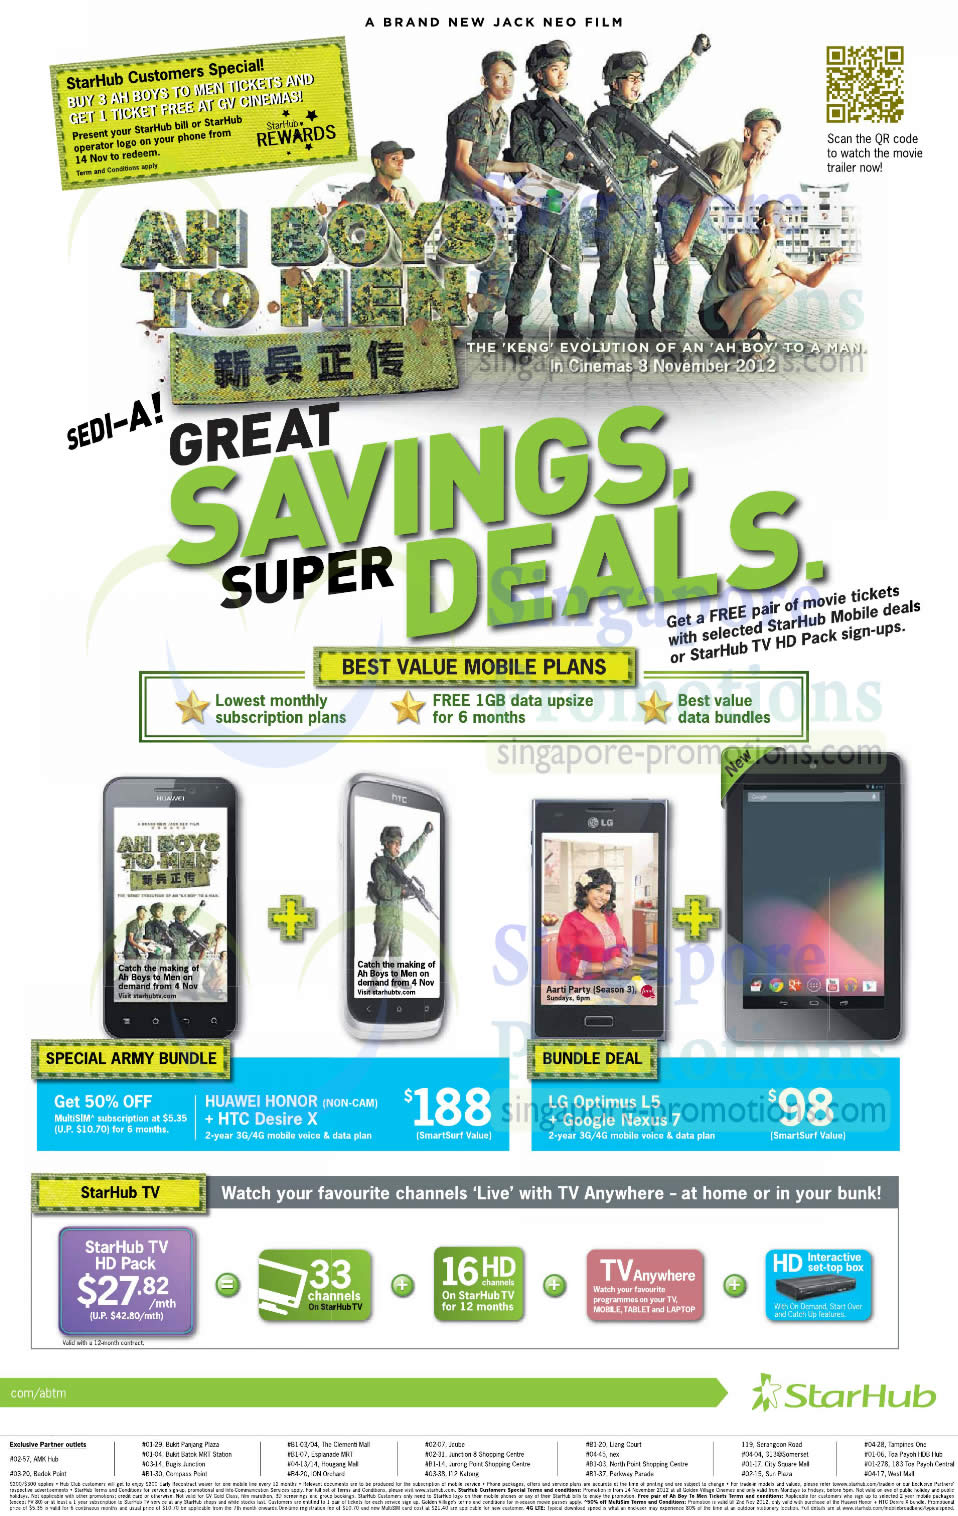 Featured image for Starhub Smartphones, Tablets, Cable TV & Mobile/Home Broadband Offers 20 - 26 Oct 2012